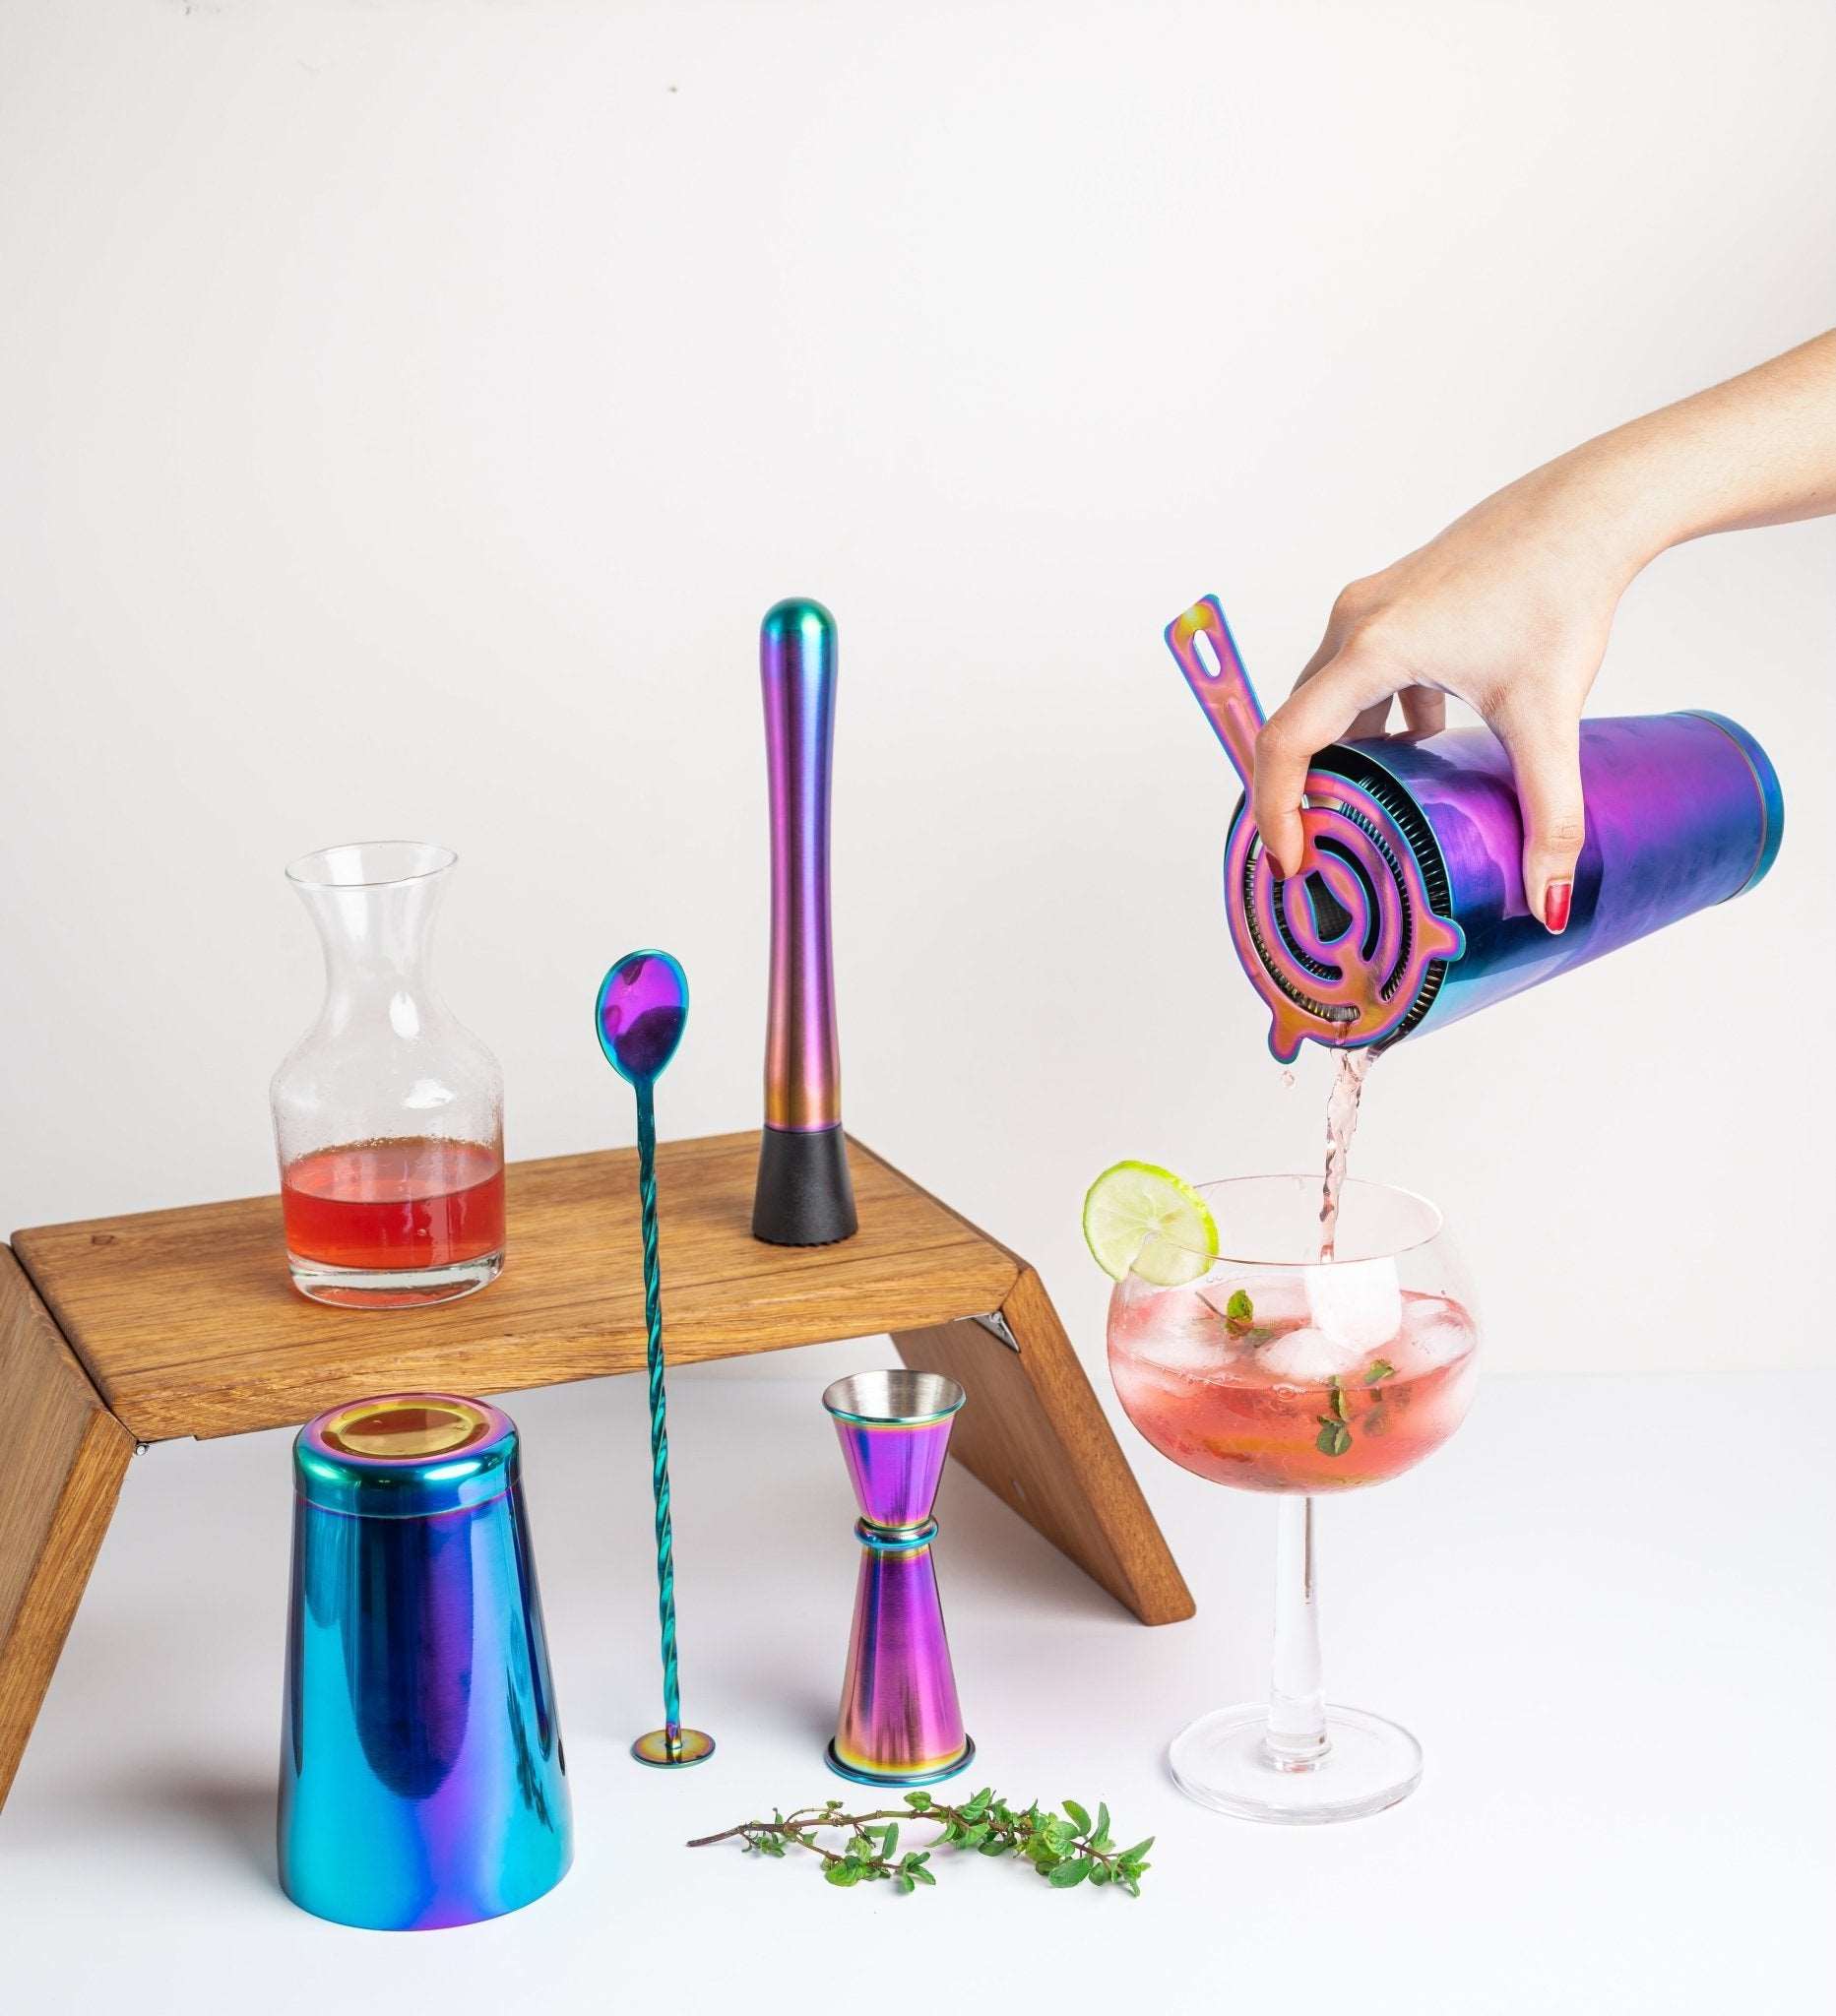 Sipologie galaxy cocktail shakers set